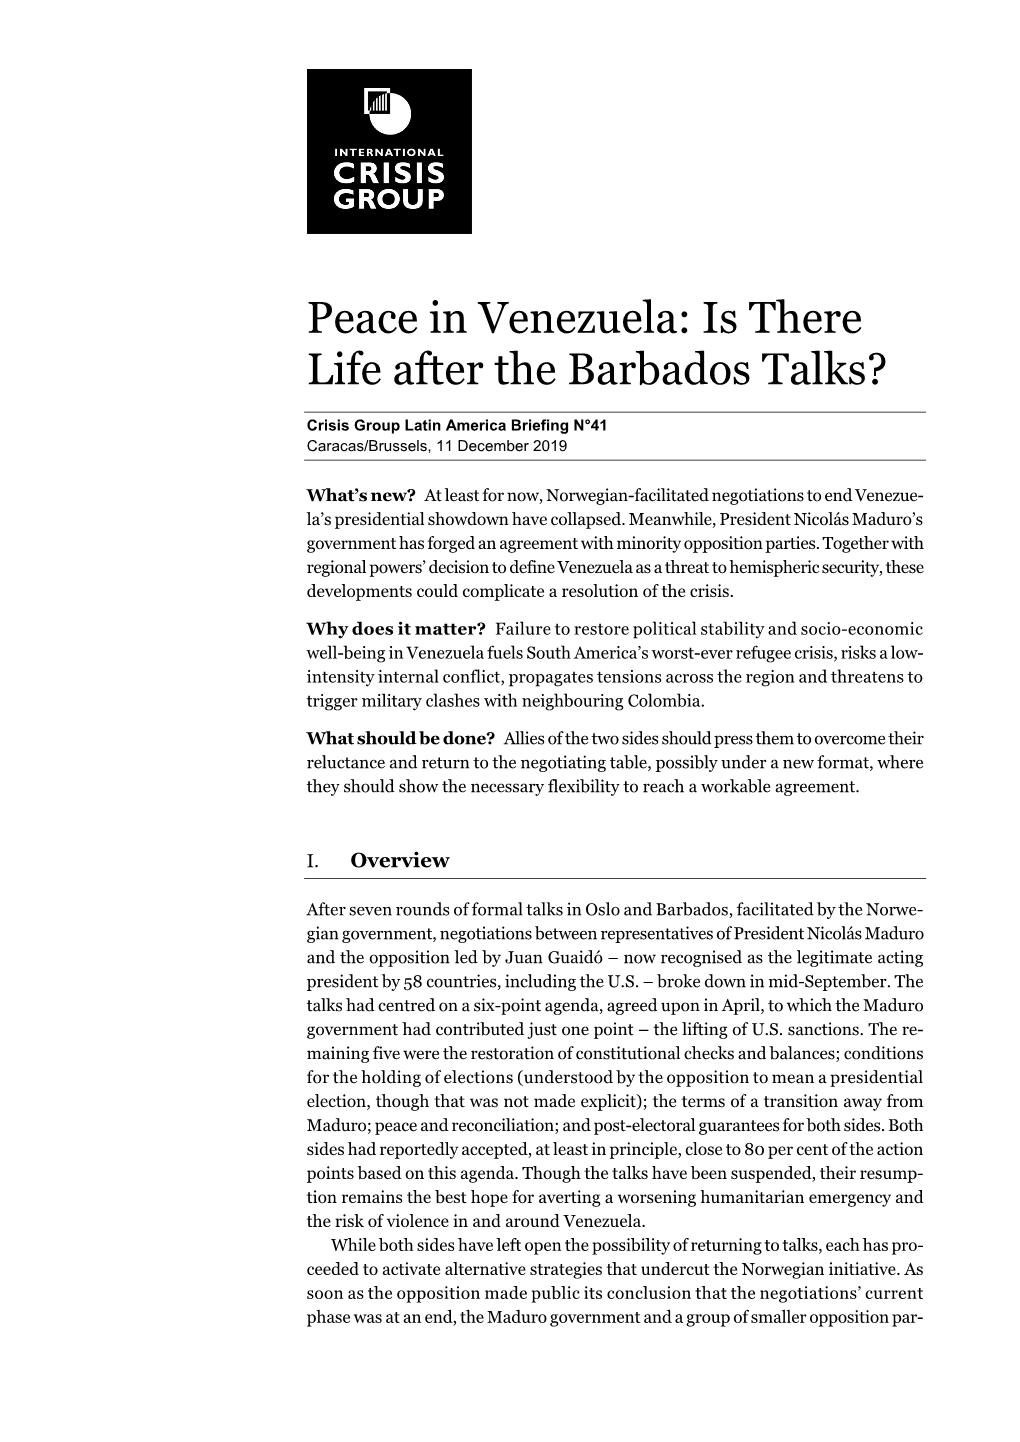 Peace in Venezuela: Is There Life After the Barbados Talks?